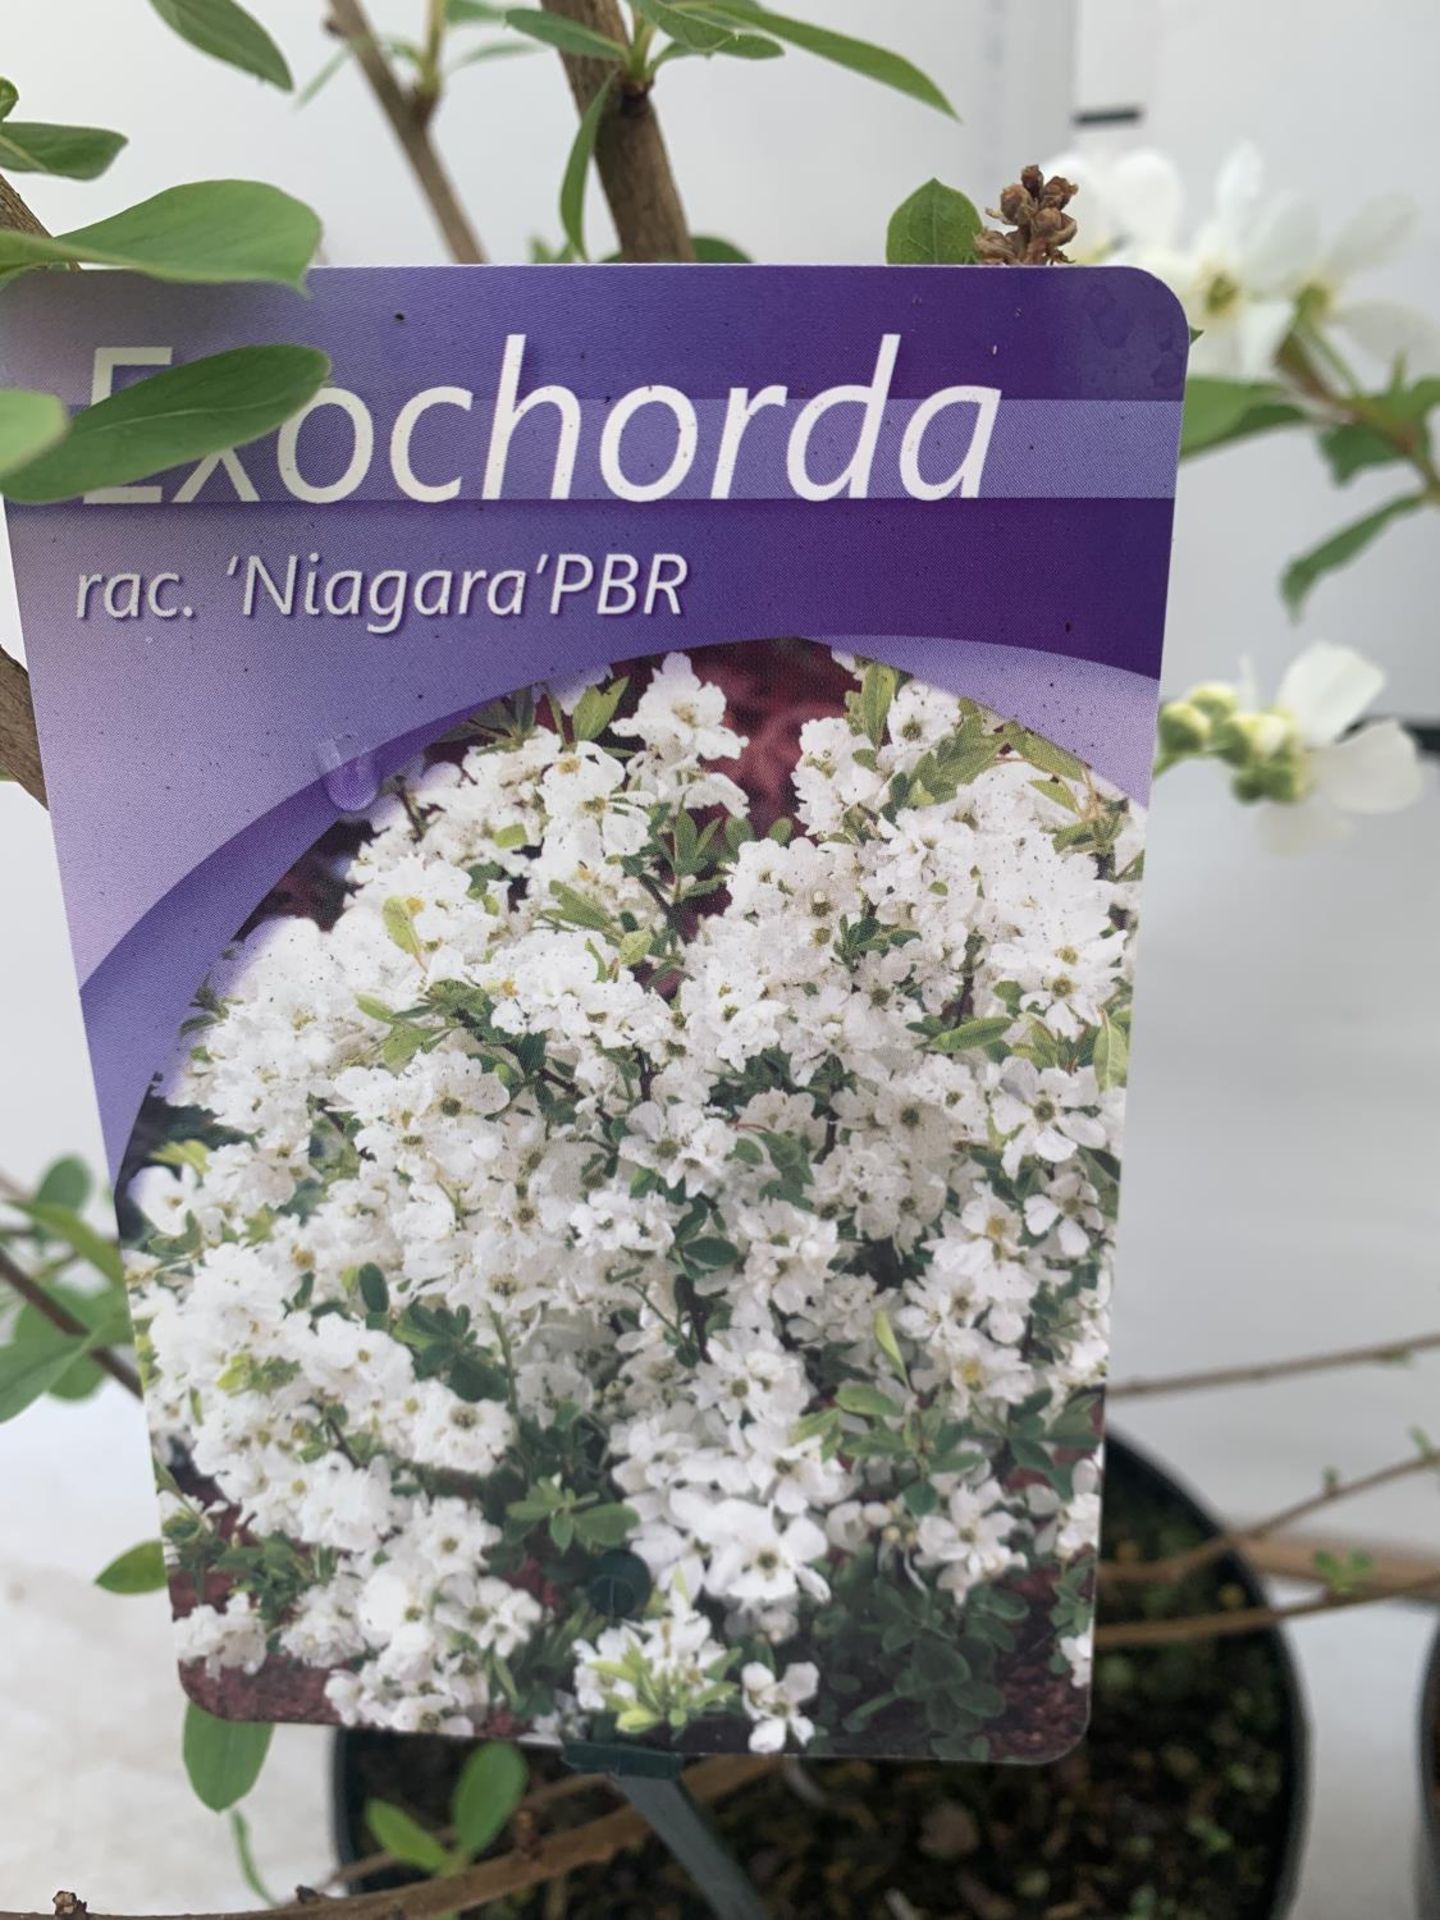 TWO EXOCHORDA 'NIAGARA' AND 'BLUSHING PEARL' APPROX 60CM IN HEIGHT IN 2 LTR POTS PLUS VAT TO BE SOLD - Image 6 of 6